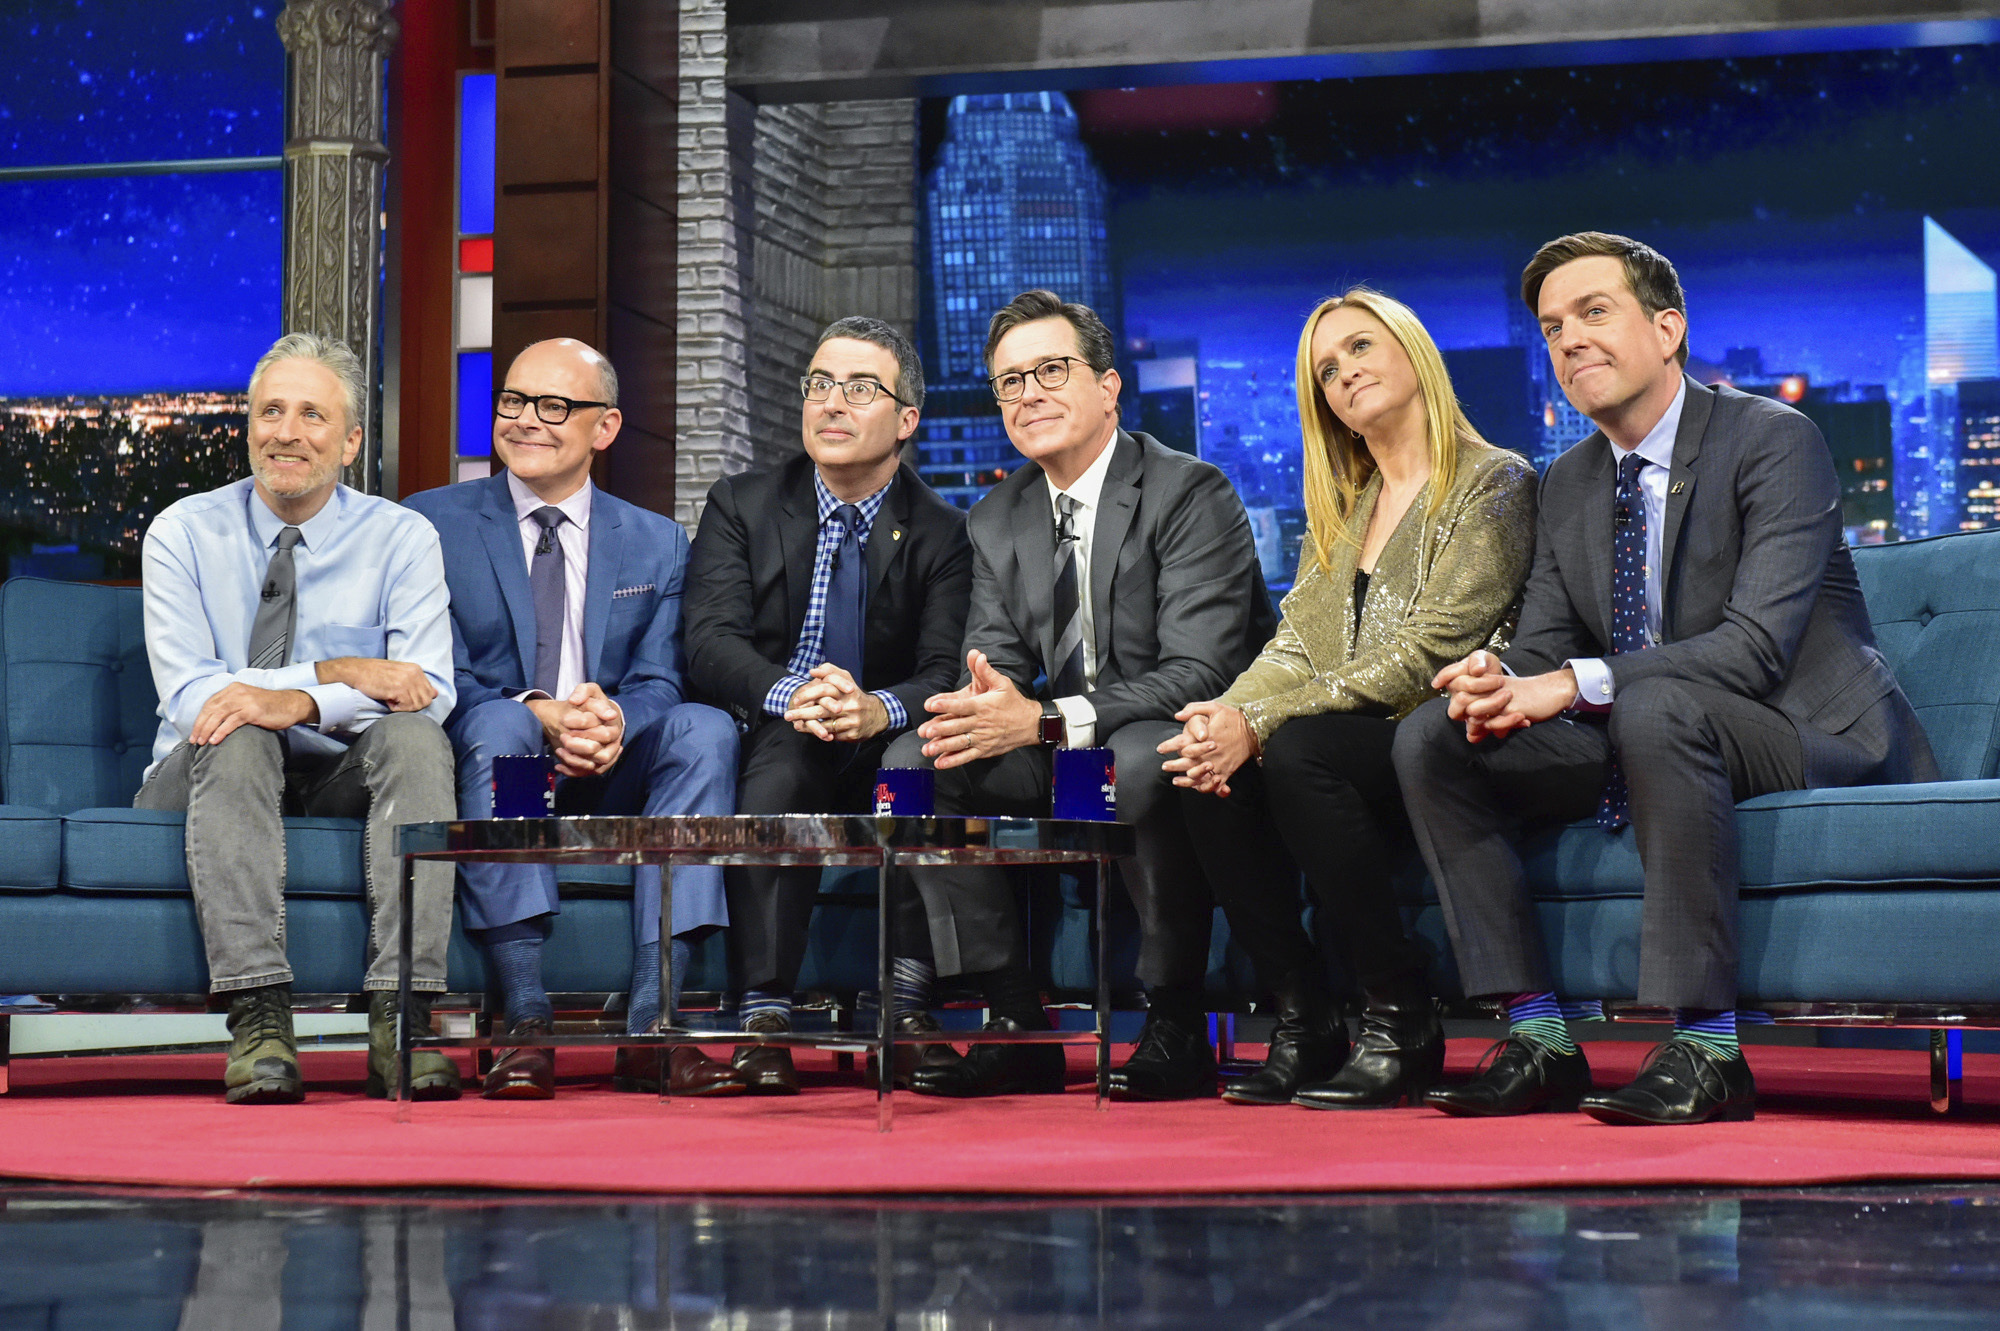 Stephen Colbert with guests Jon Stewart, Rob Corddry, John Oliver, Samantha Bee, and Ed Helms during "The Late Show with Stephen Colbert," on May 9, 2017, in New York. (Scott Kowalchyk—CBS/AP)